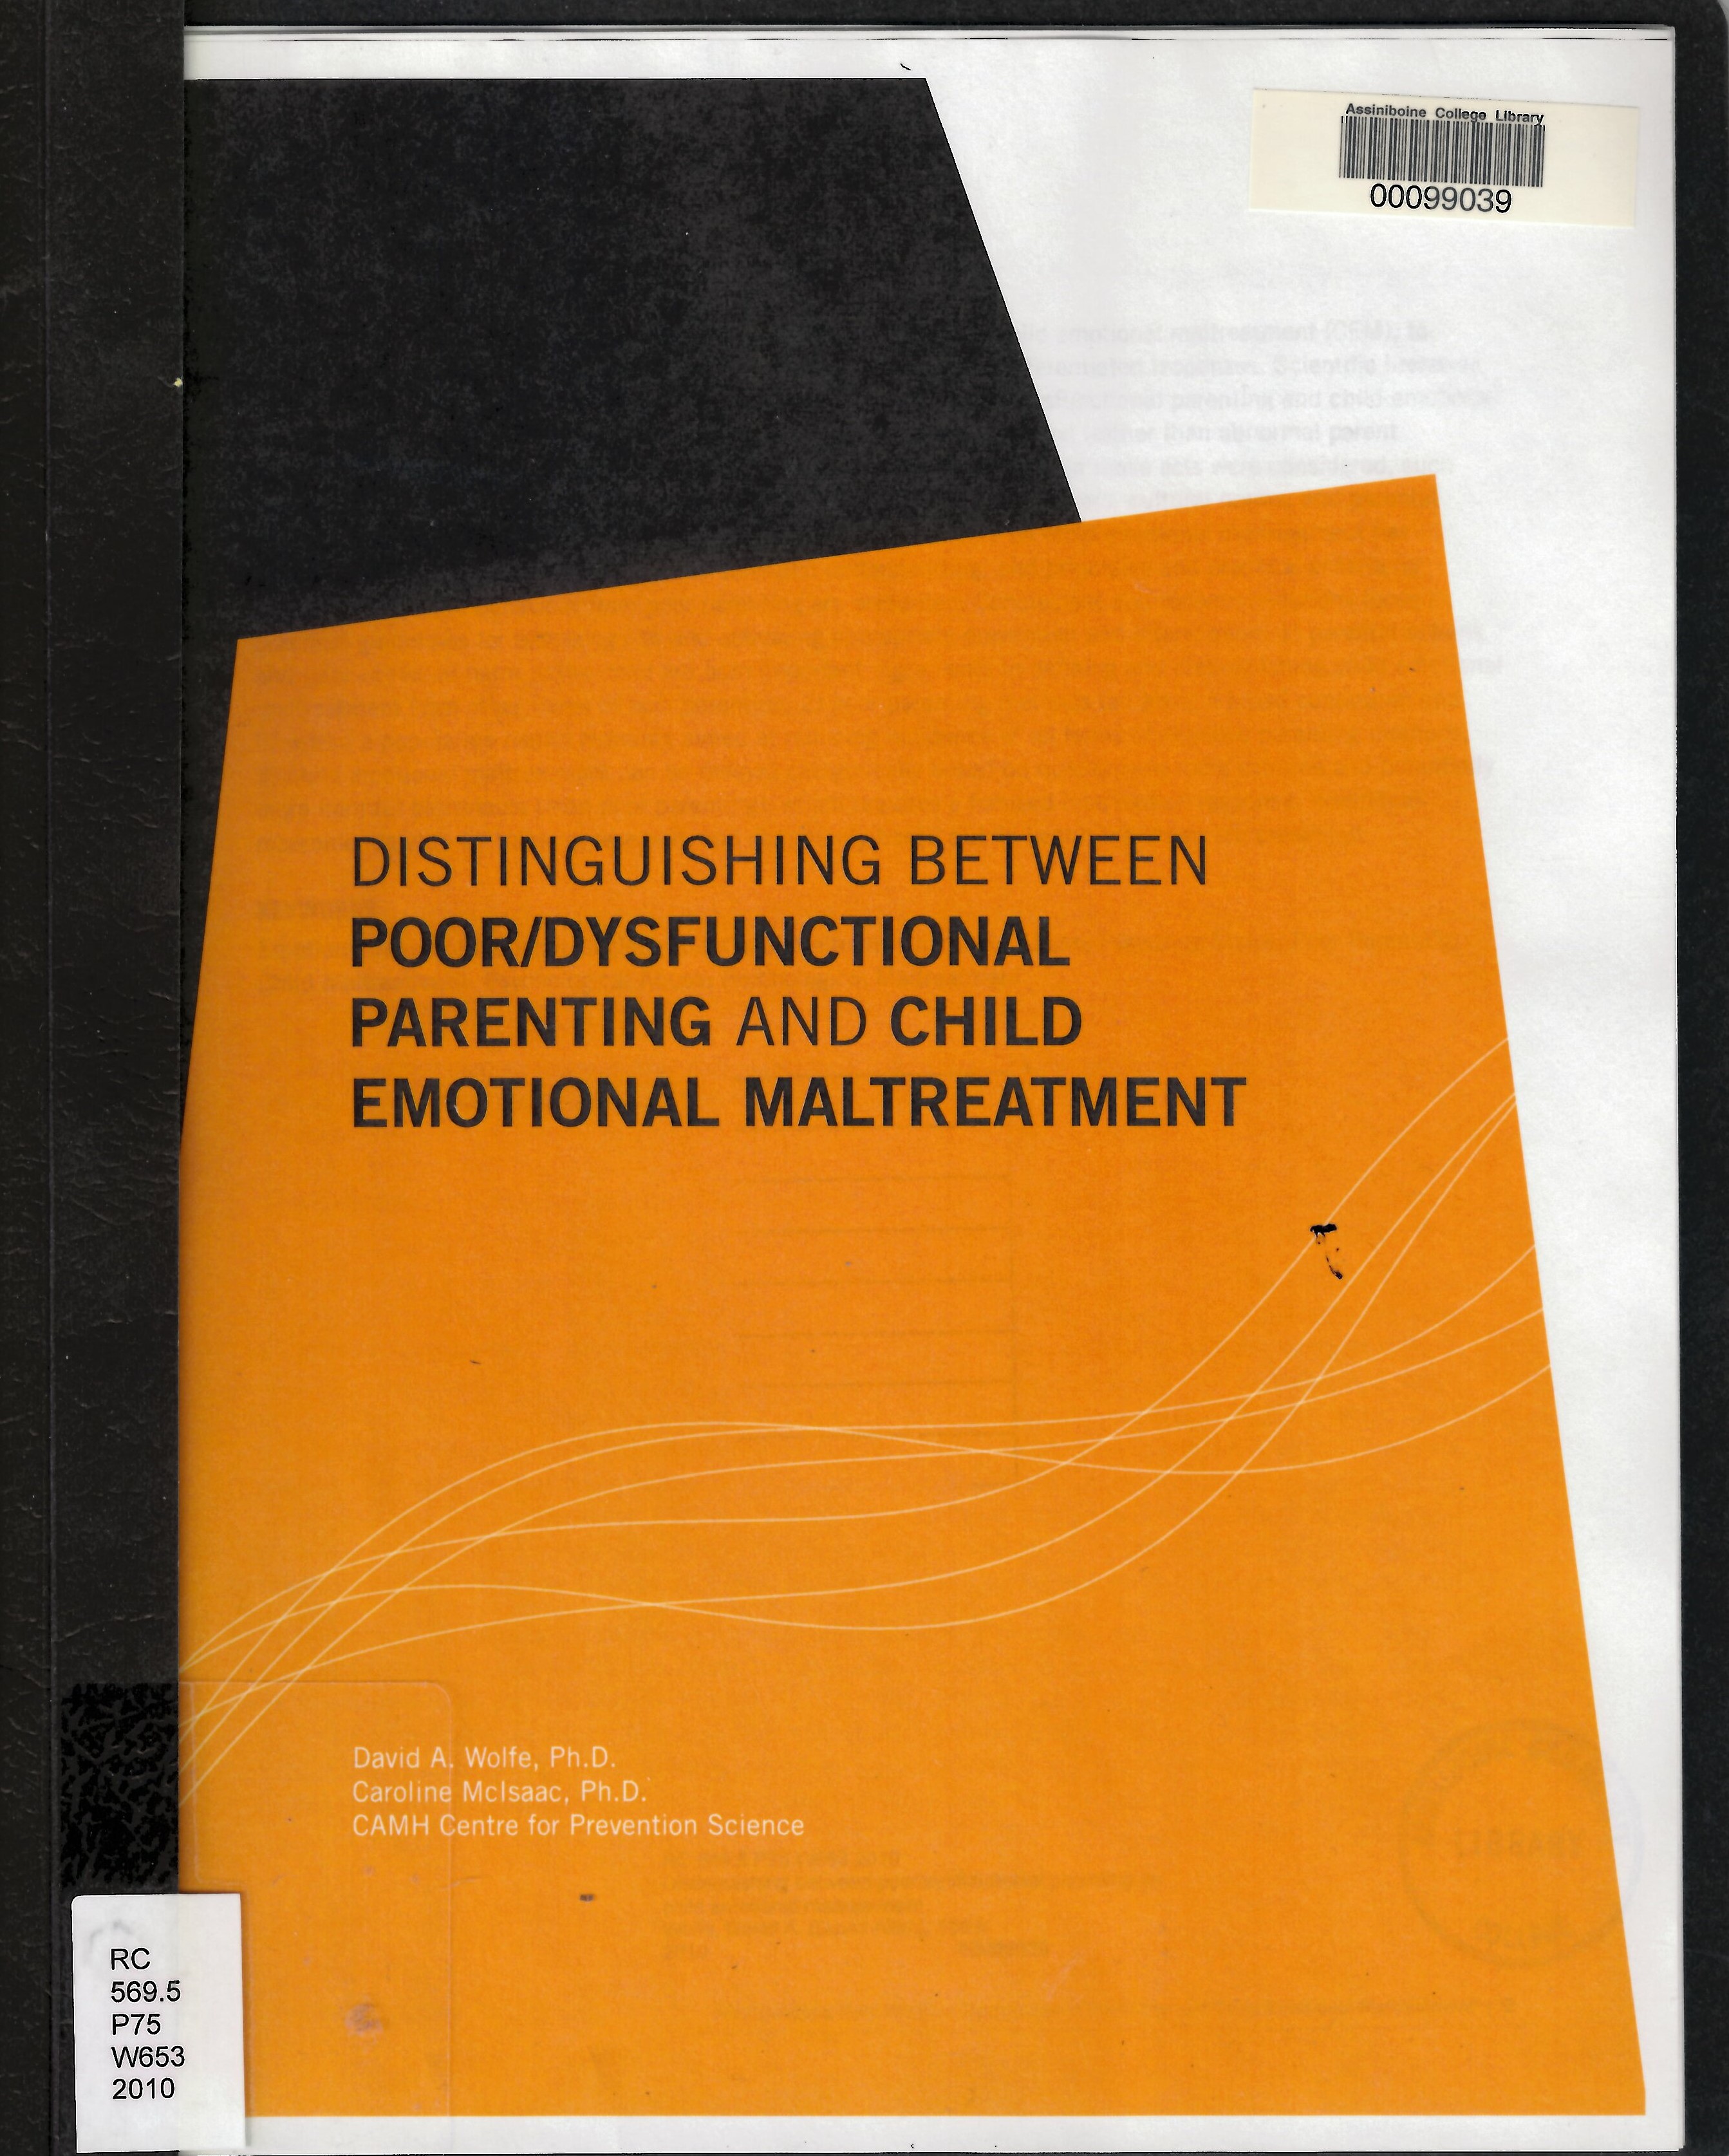 Distinguishing between poor/dysfunctional parenting and child emotional maltreatment